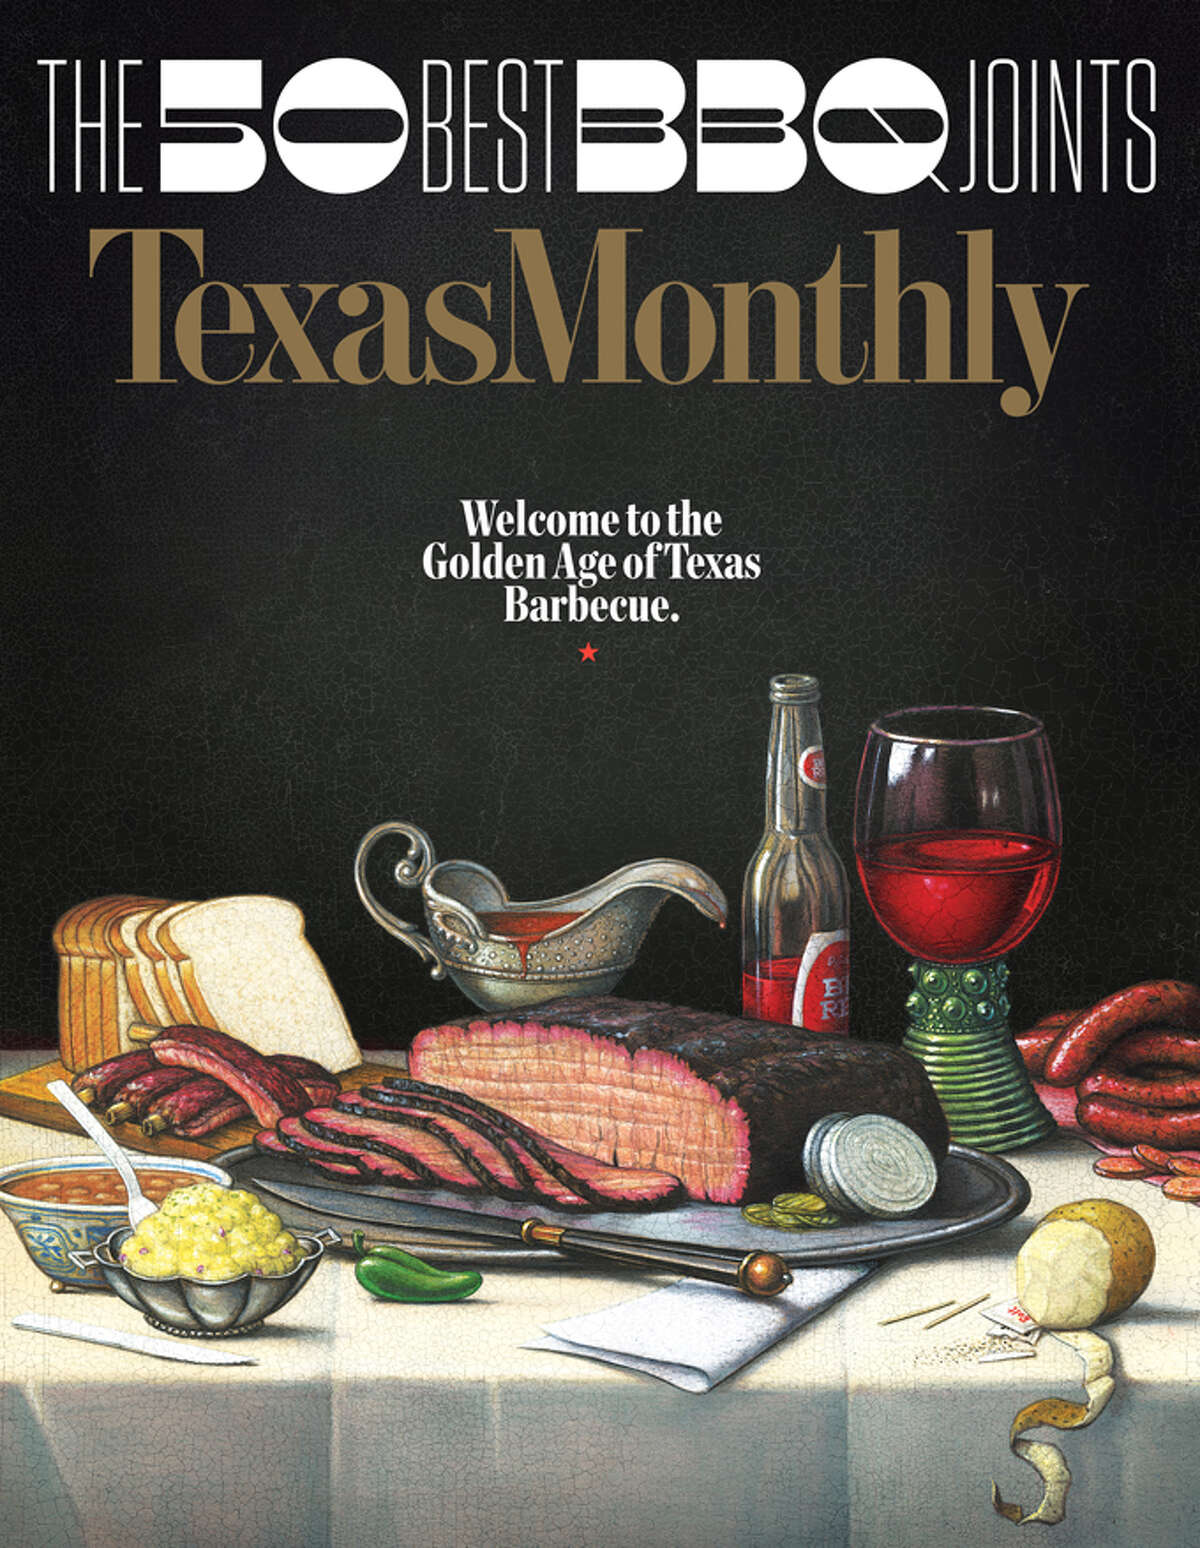 S.A. snags 2 spots on Texas Monthly’s new Top 50 BBQ list